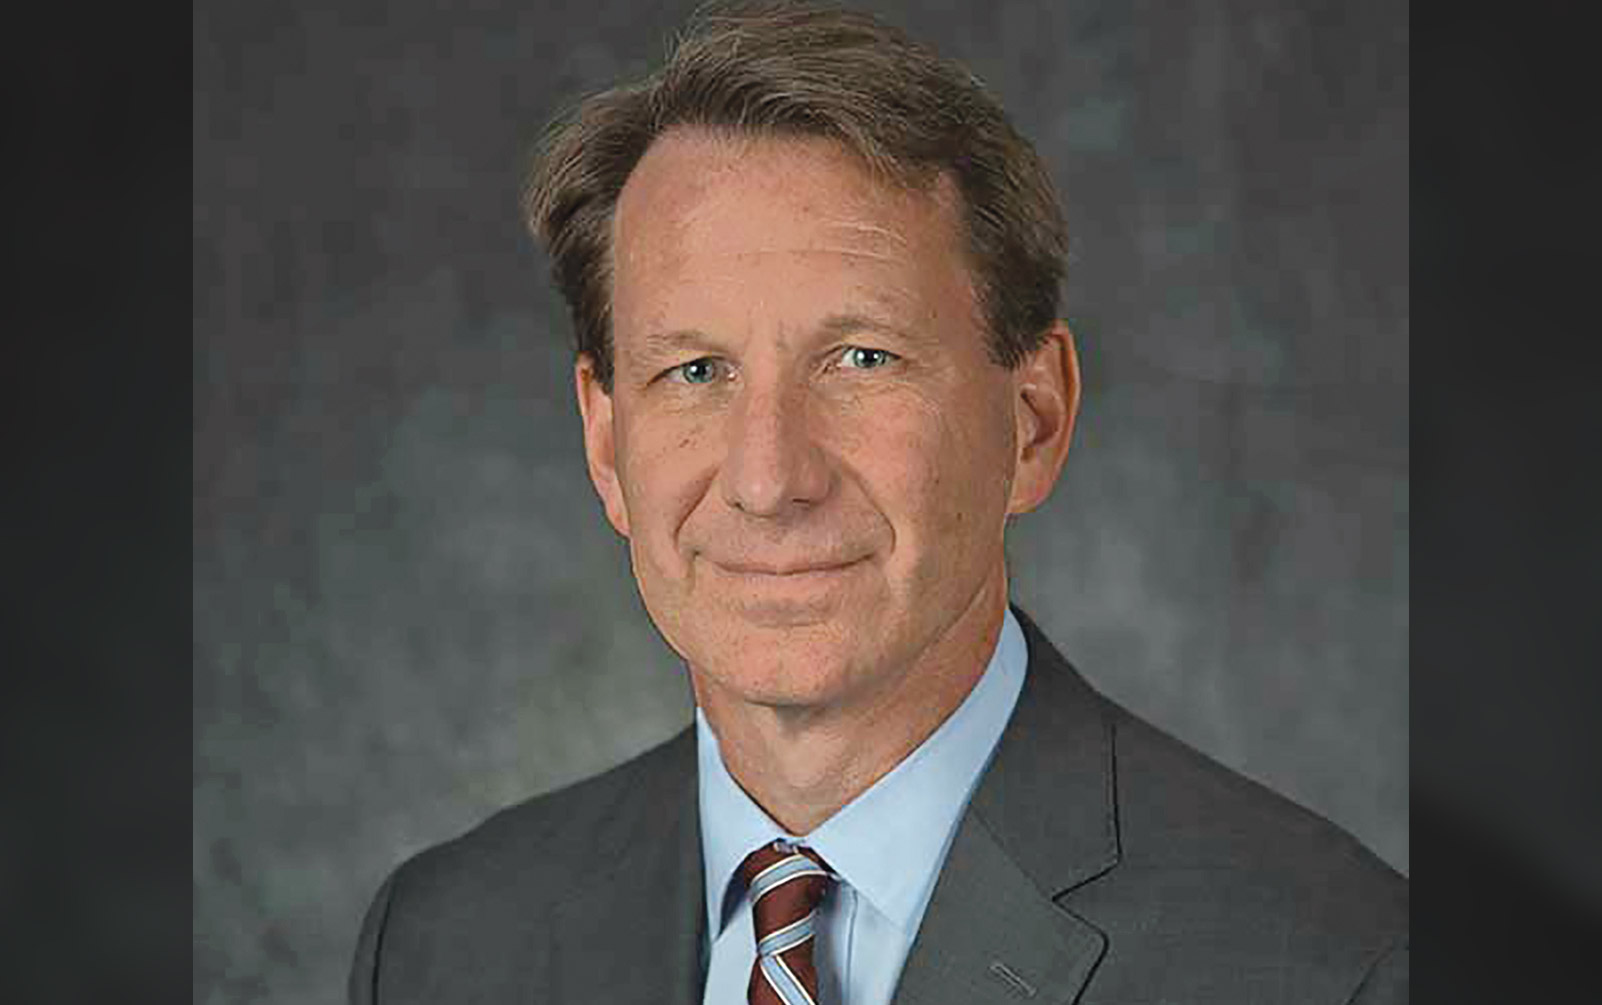 NCI Director Dr. Norman E. Sharpless Discusses 2019 Budget Plans During Social Media Event